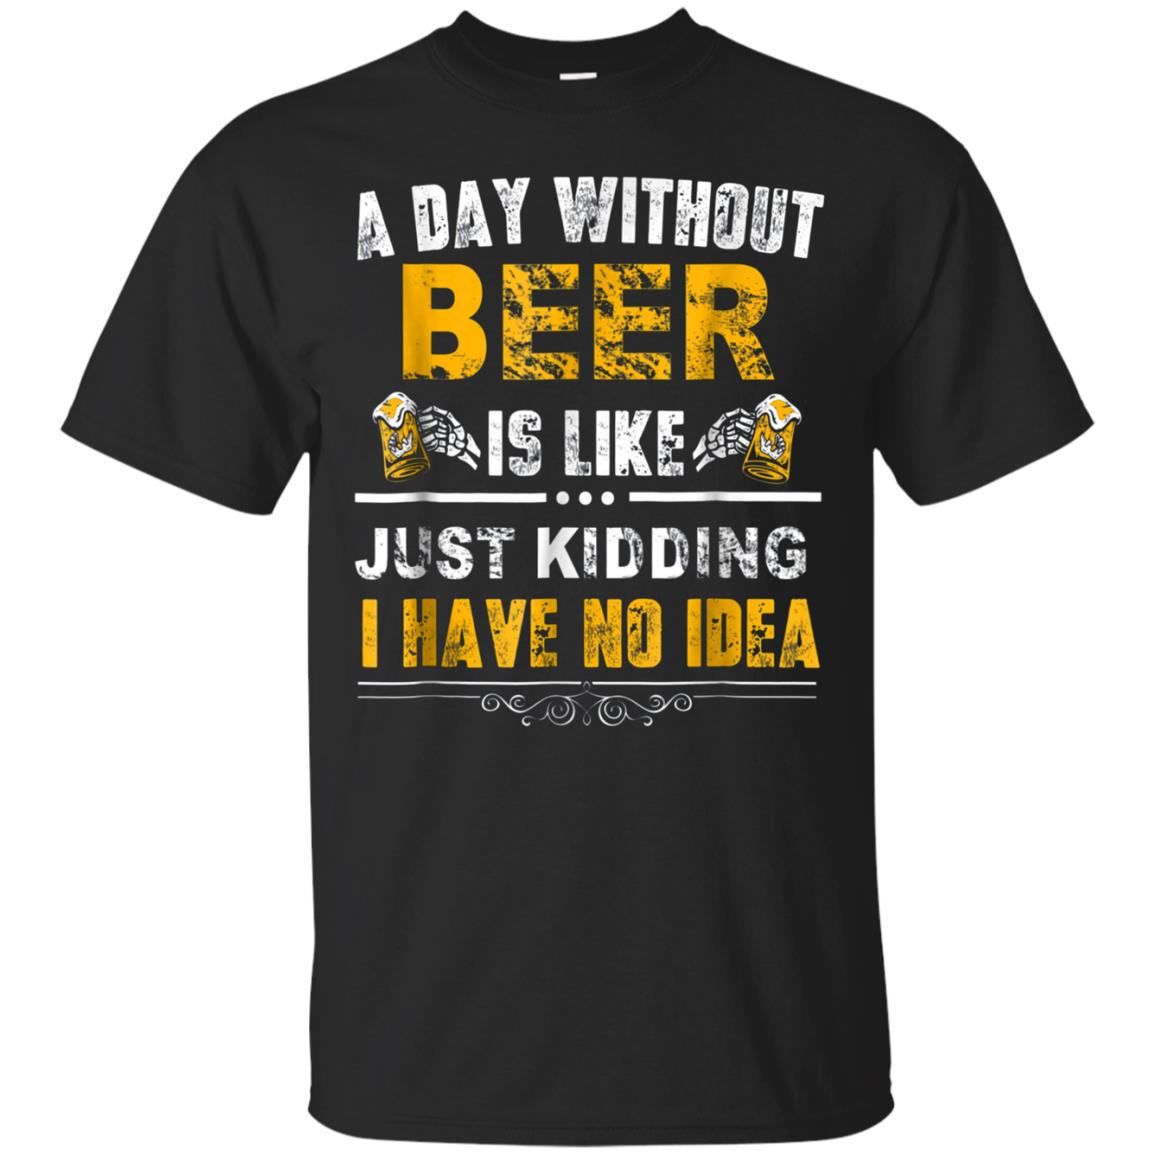 Day Without Beer Funny Beer Lover Gift Tee T Shirt